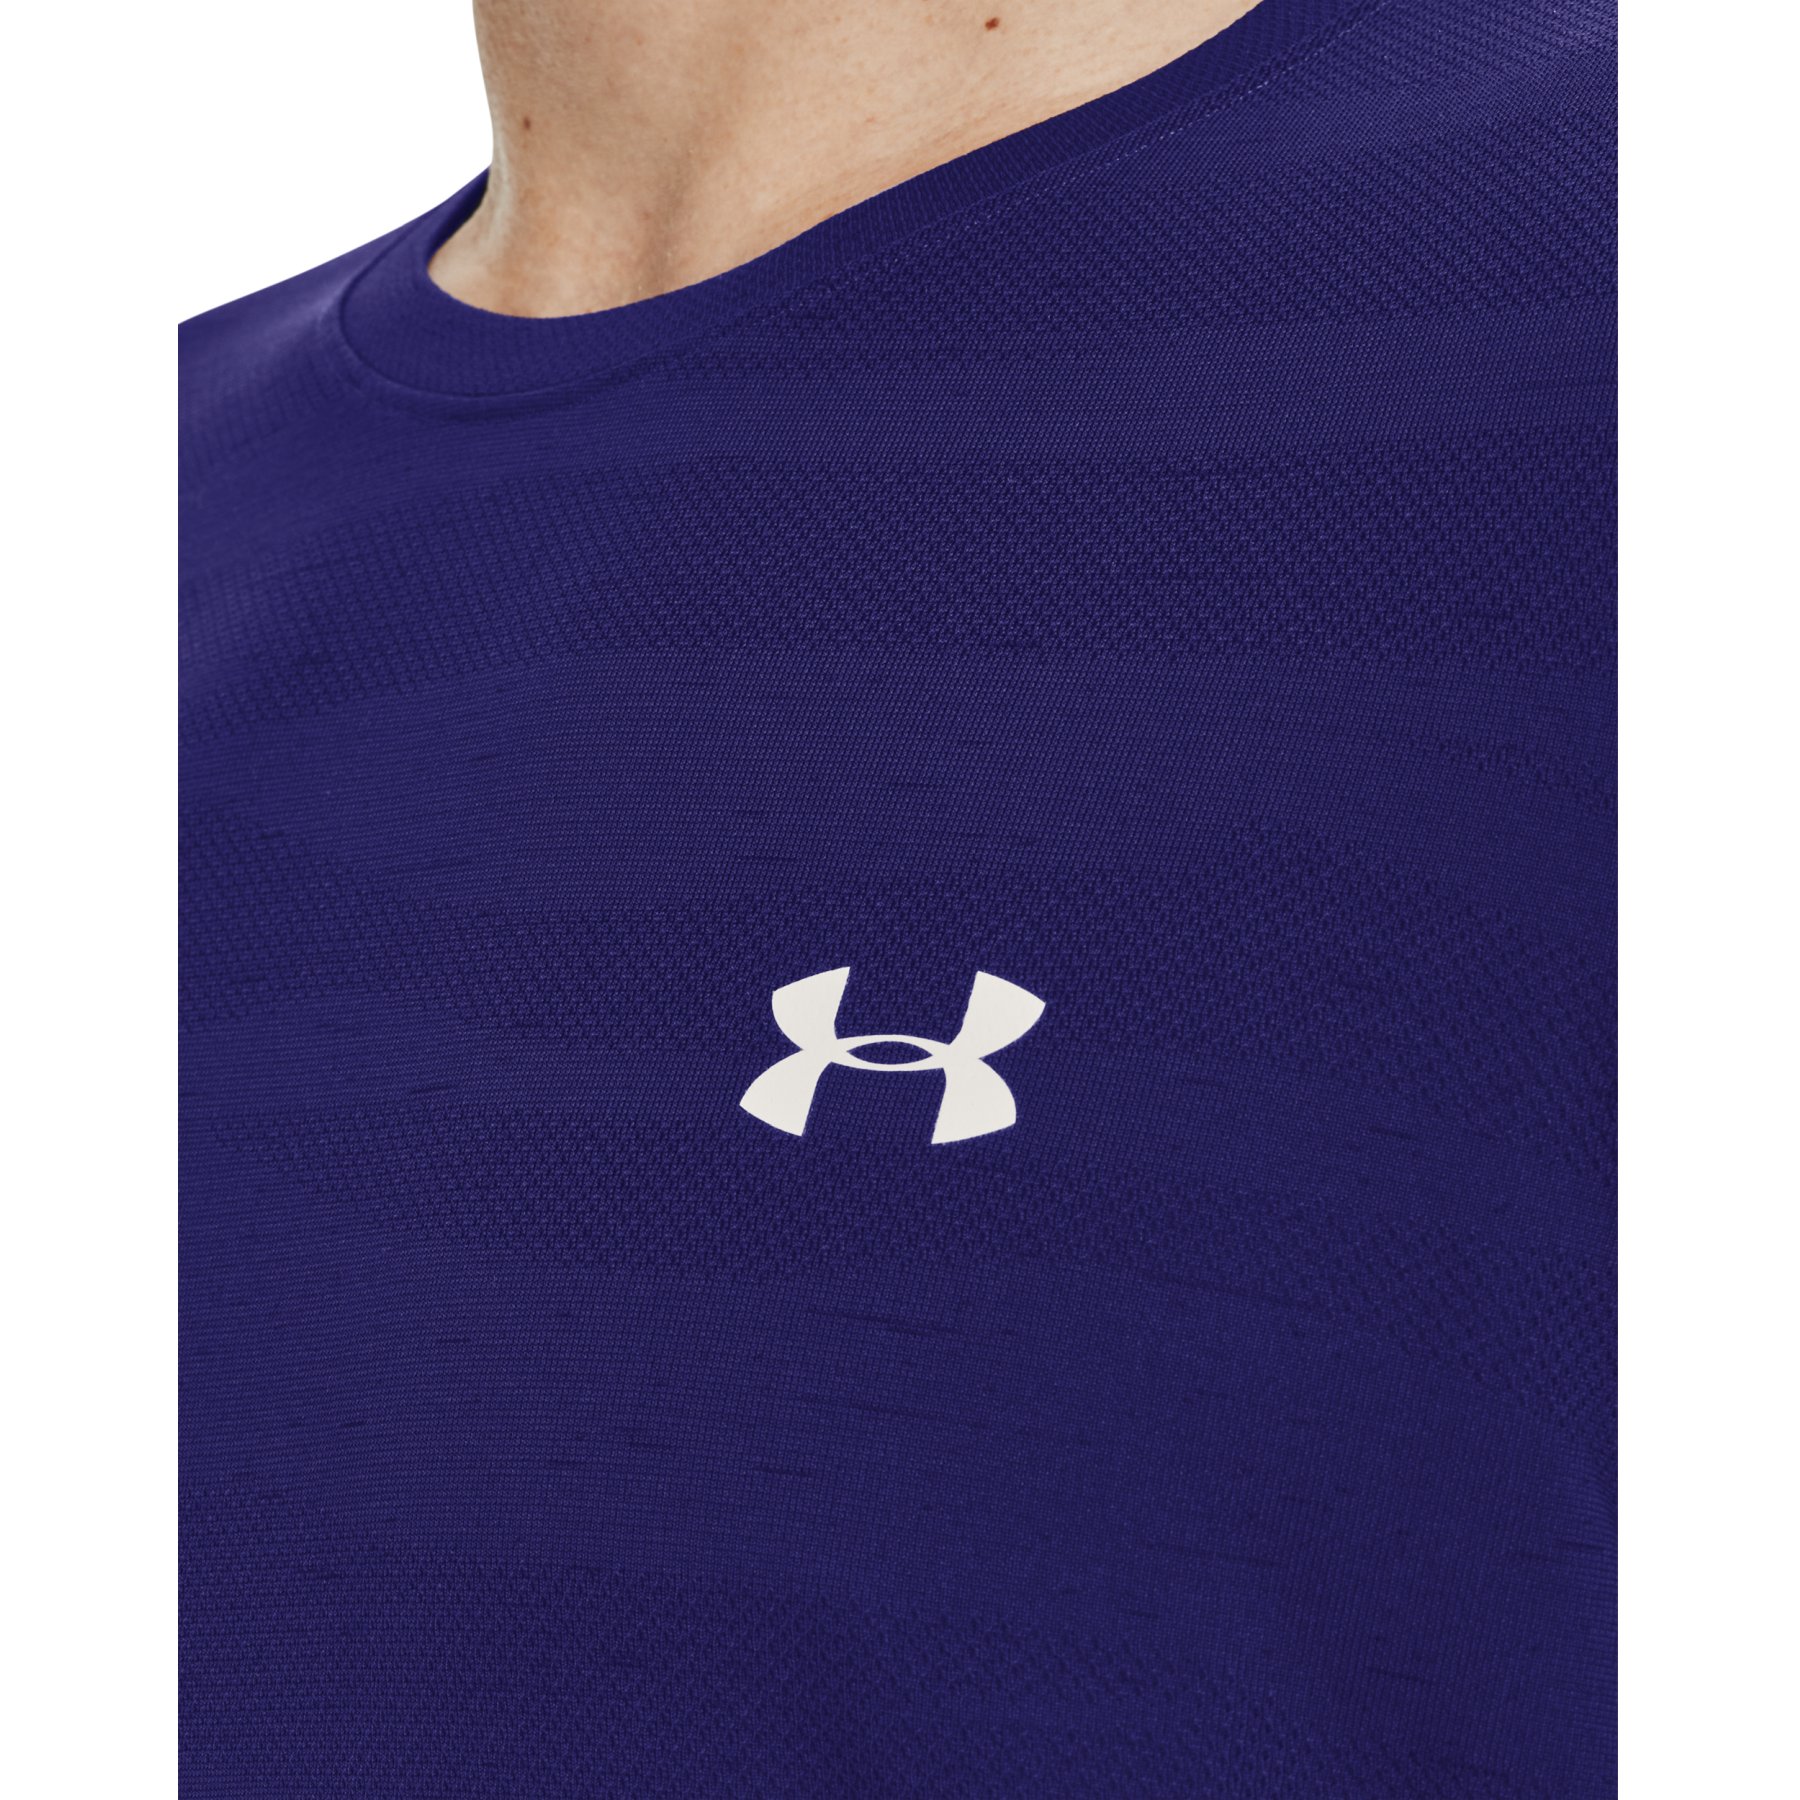 Under Armour seamless long sleeve shirt in gray